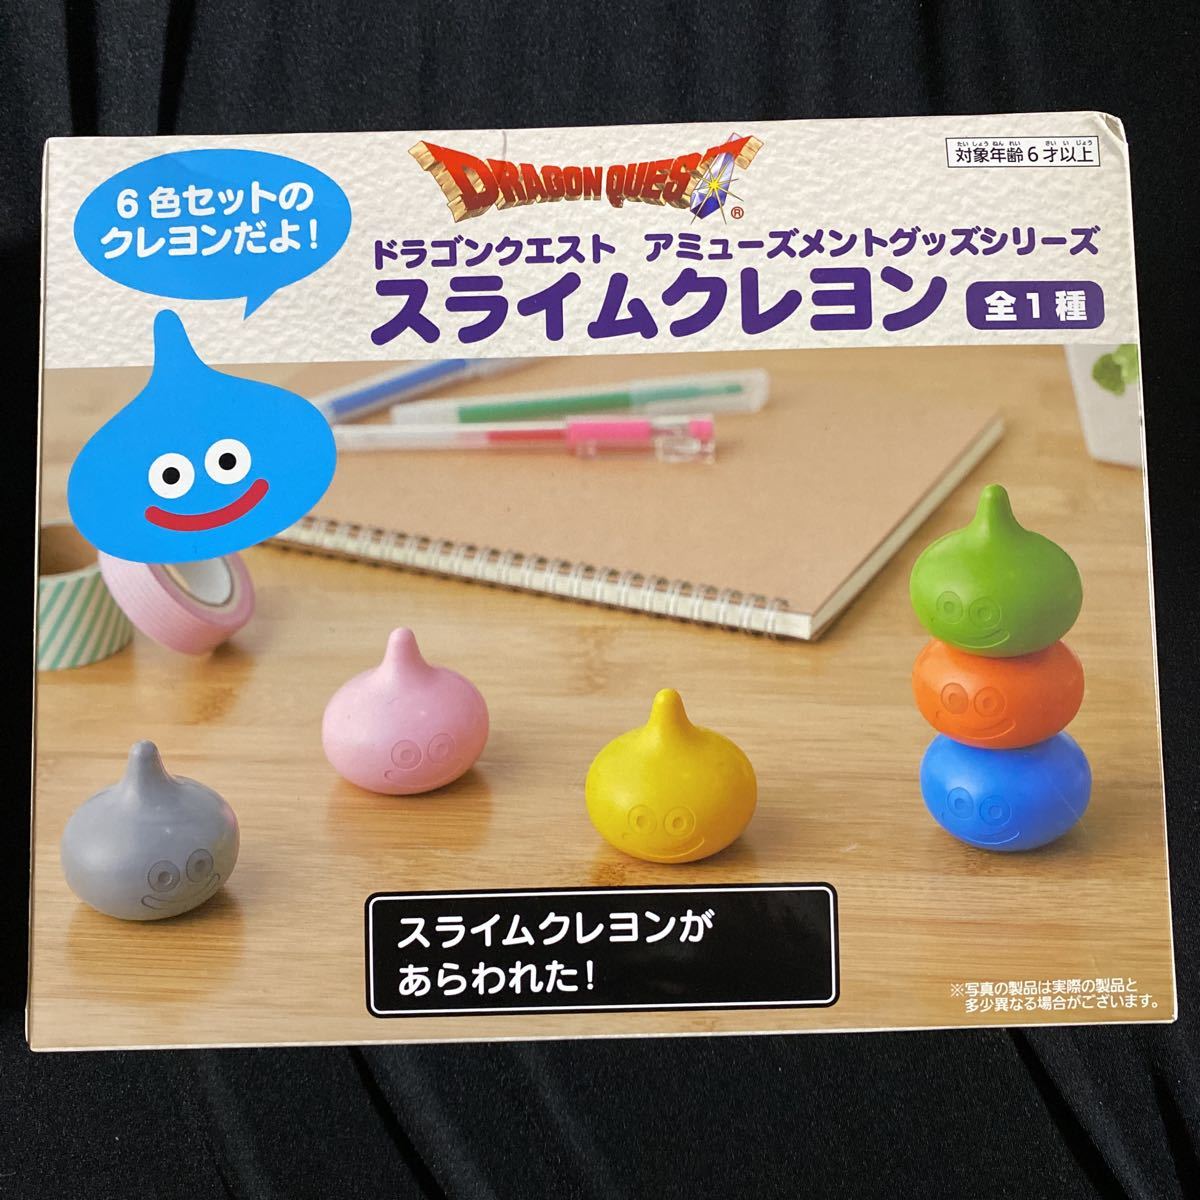  Dragon Quest *AM amusement goods series * Sly m crayons * all 1 kind *6 color 